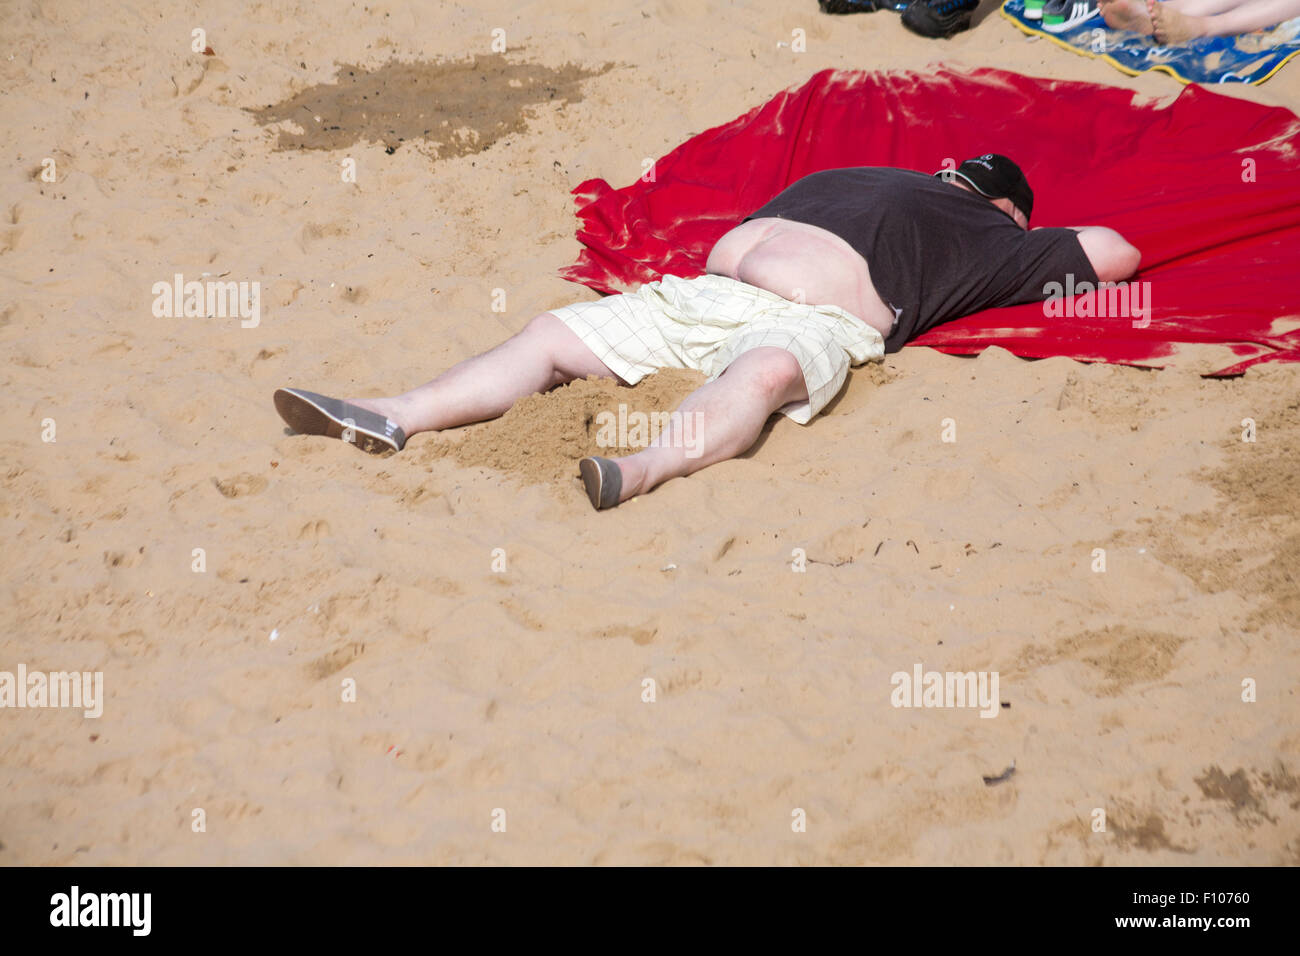 Male enjoying the hot sunny day sunshine at Bournemouth beach in August Stock Photo